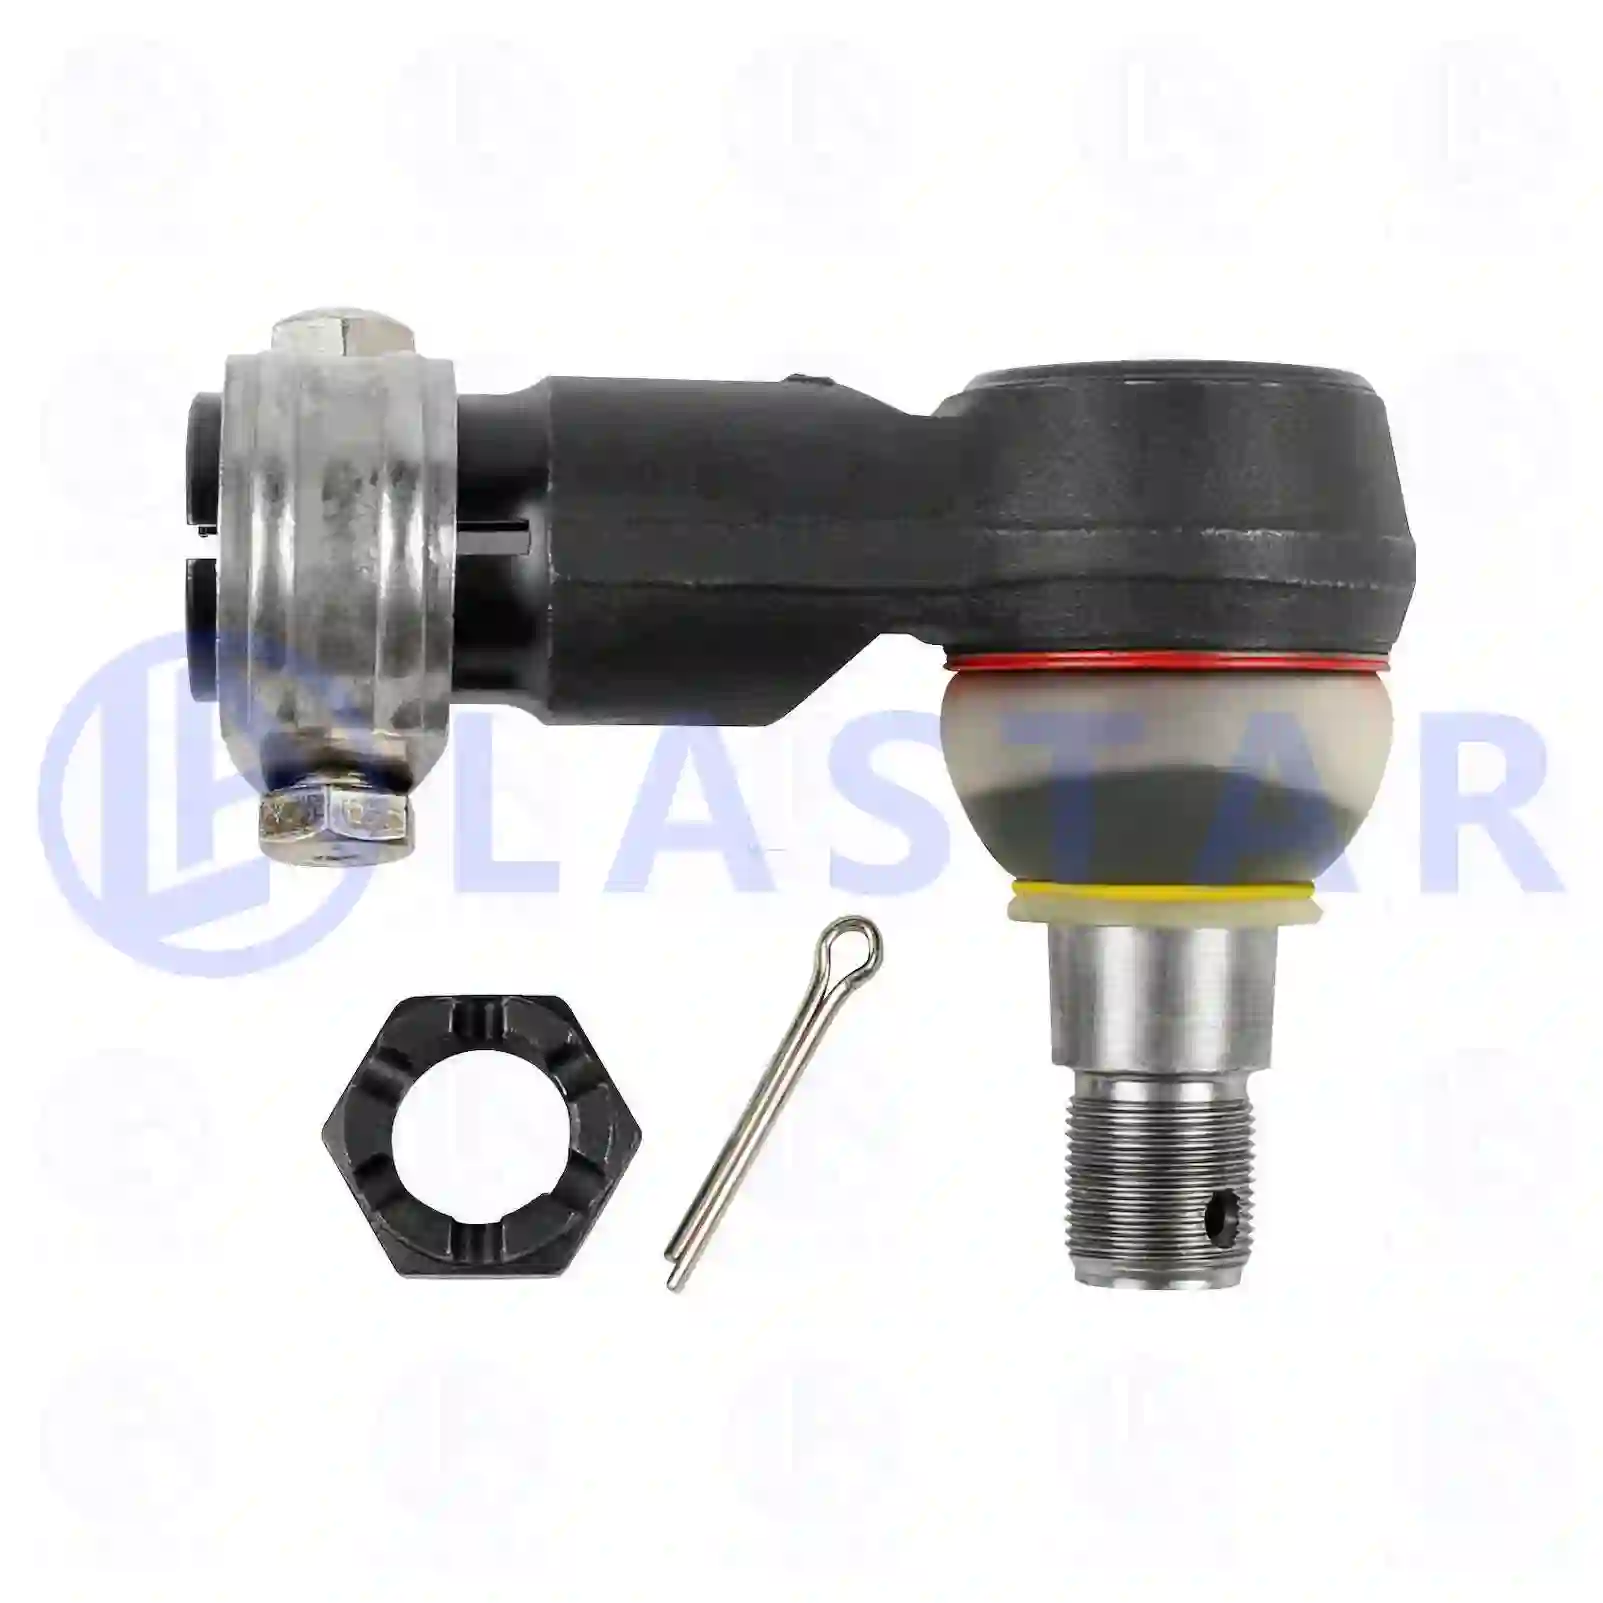 Ball joint, right hand thread, 77705669, 1603788, 1604105, ZG40402-0008 ||  77705669 Lastar Spare Part | Truck Spare Parts, Auotomotive Spare Parts Ball joint, right hand thread, 77705669, 1603788, 1604105, ZG40402-0008 ||  77705669 Lastar Spare Part | Truck Spare Parts, Auotomotive Spare Parts